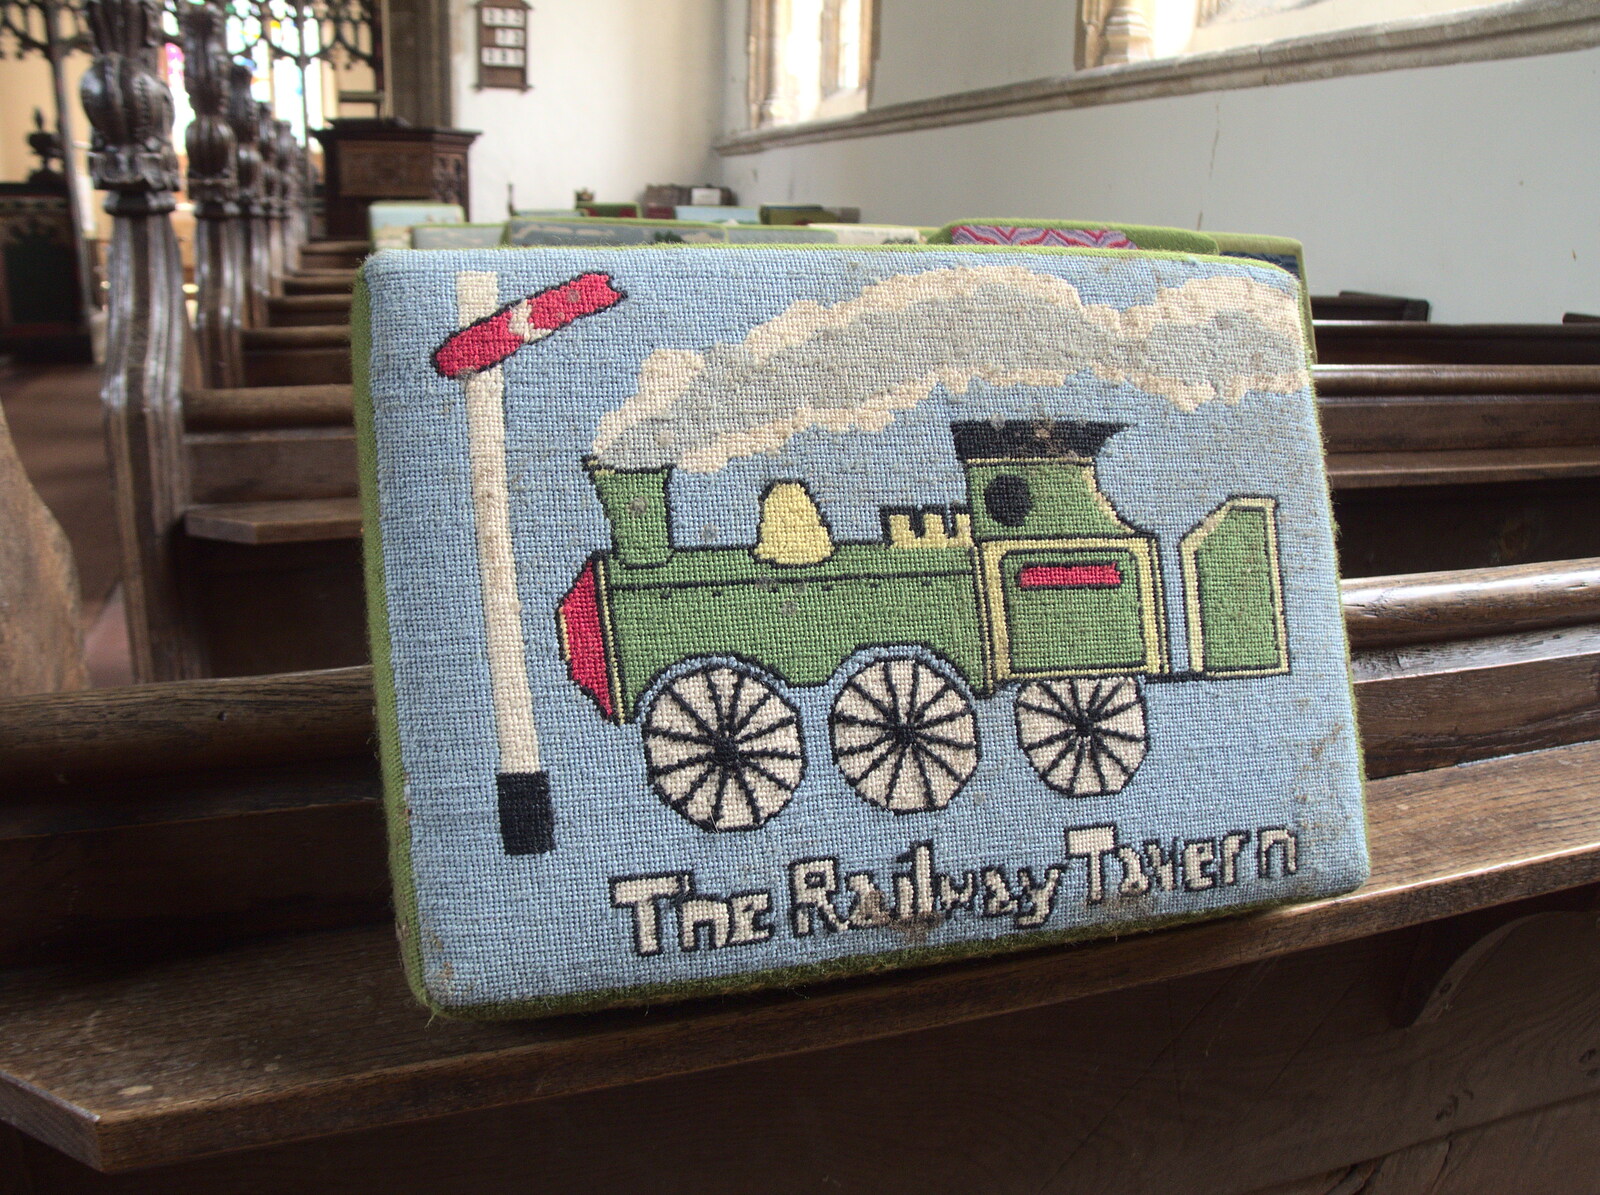 A kneeler dedicated to the Mellis Railway pub from Pizza at the Village Hall, Brome, Suffolk - 30th April 2023